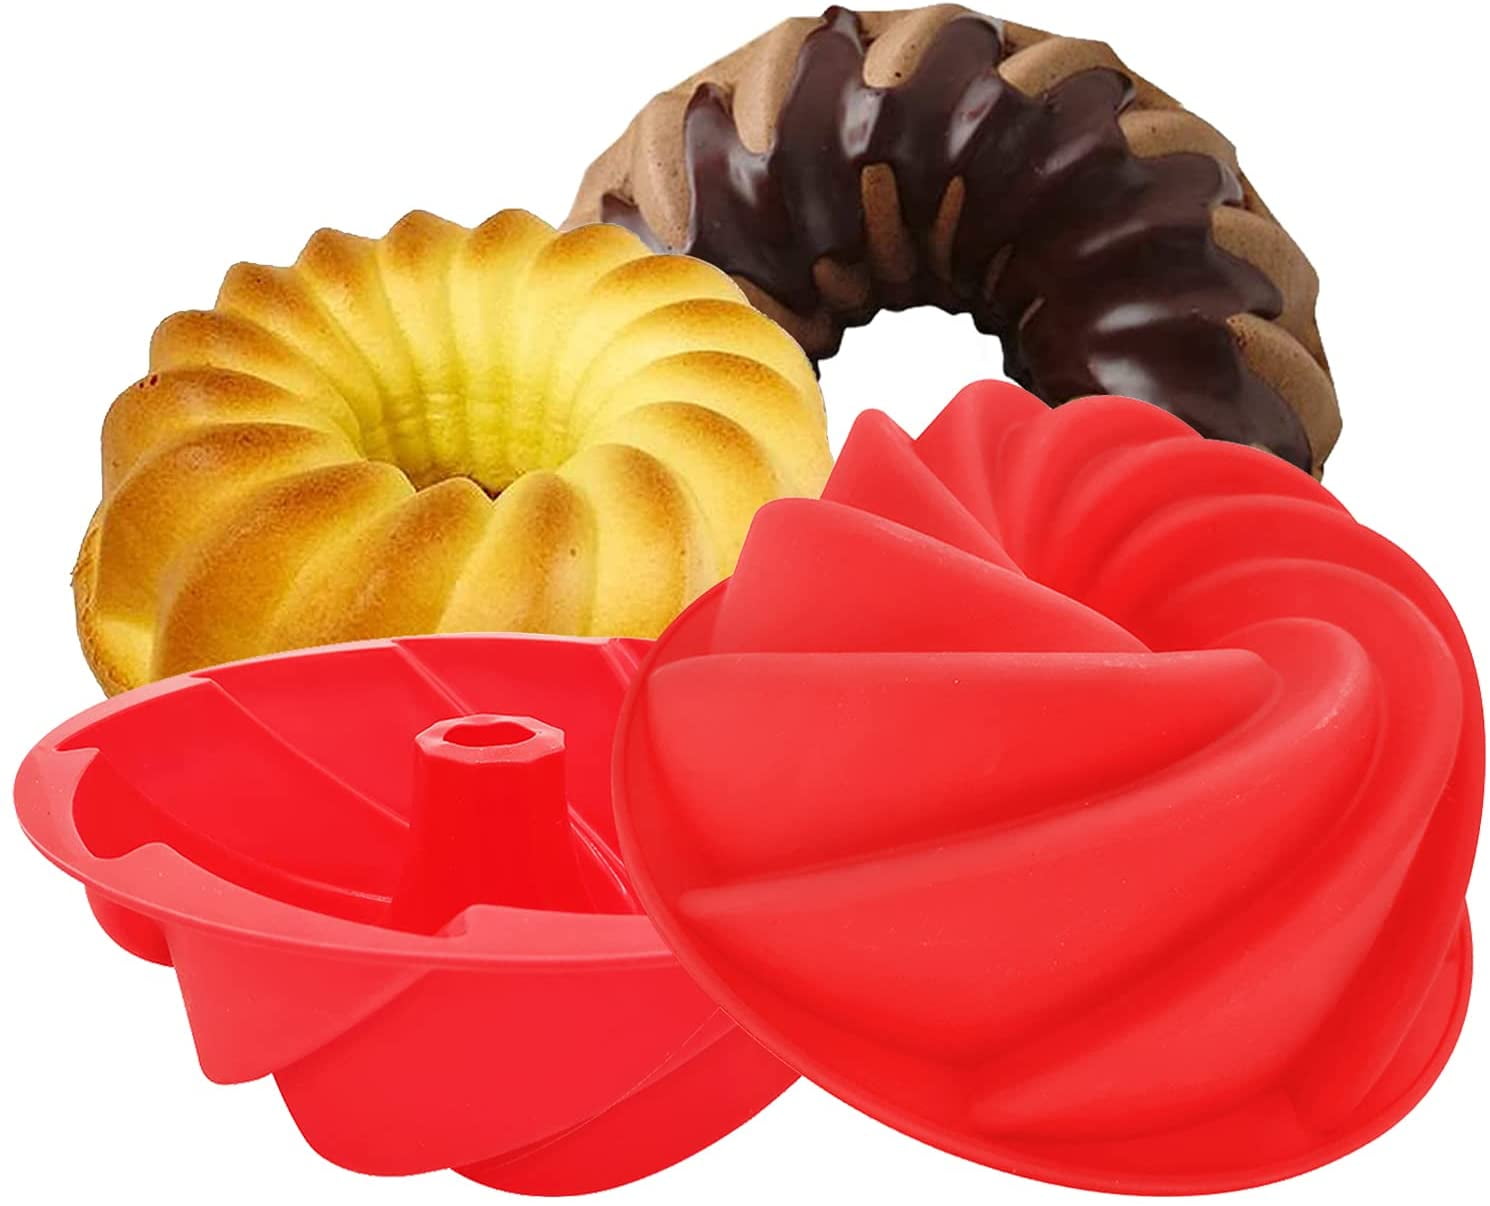 Small Spiral Shape Cake Pan Bread Chocolate Bakeware Silicone Mold Baking Tools 